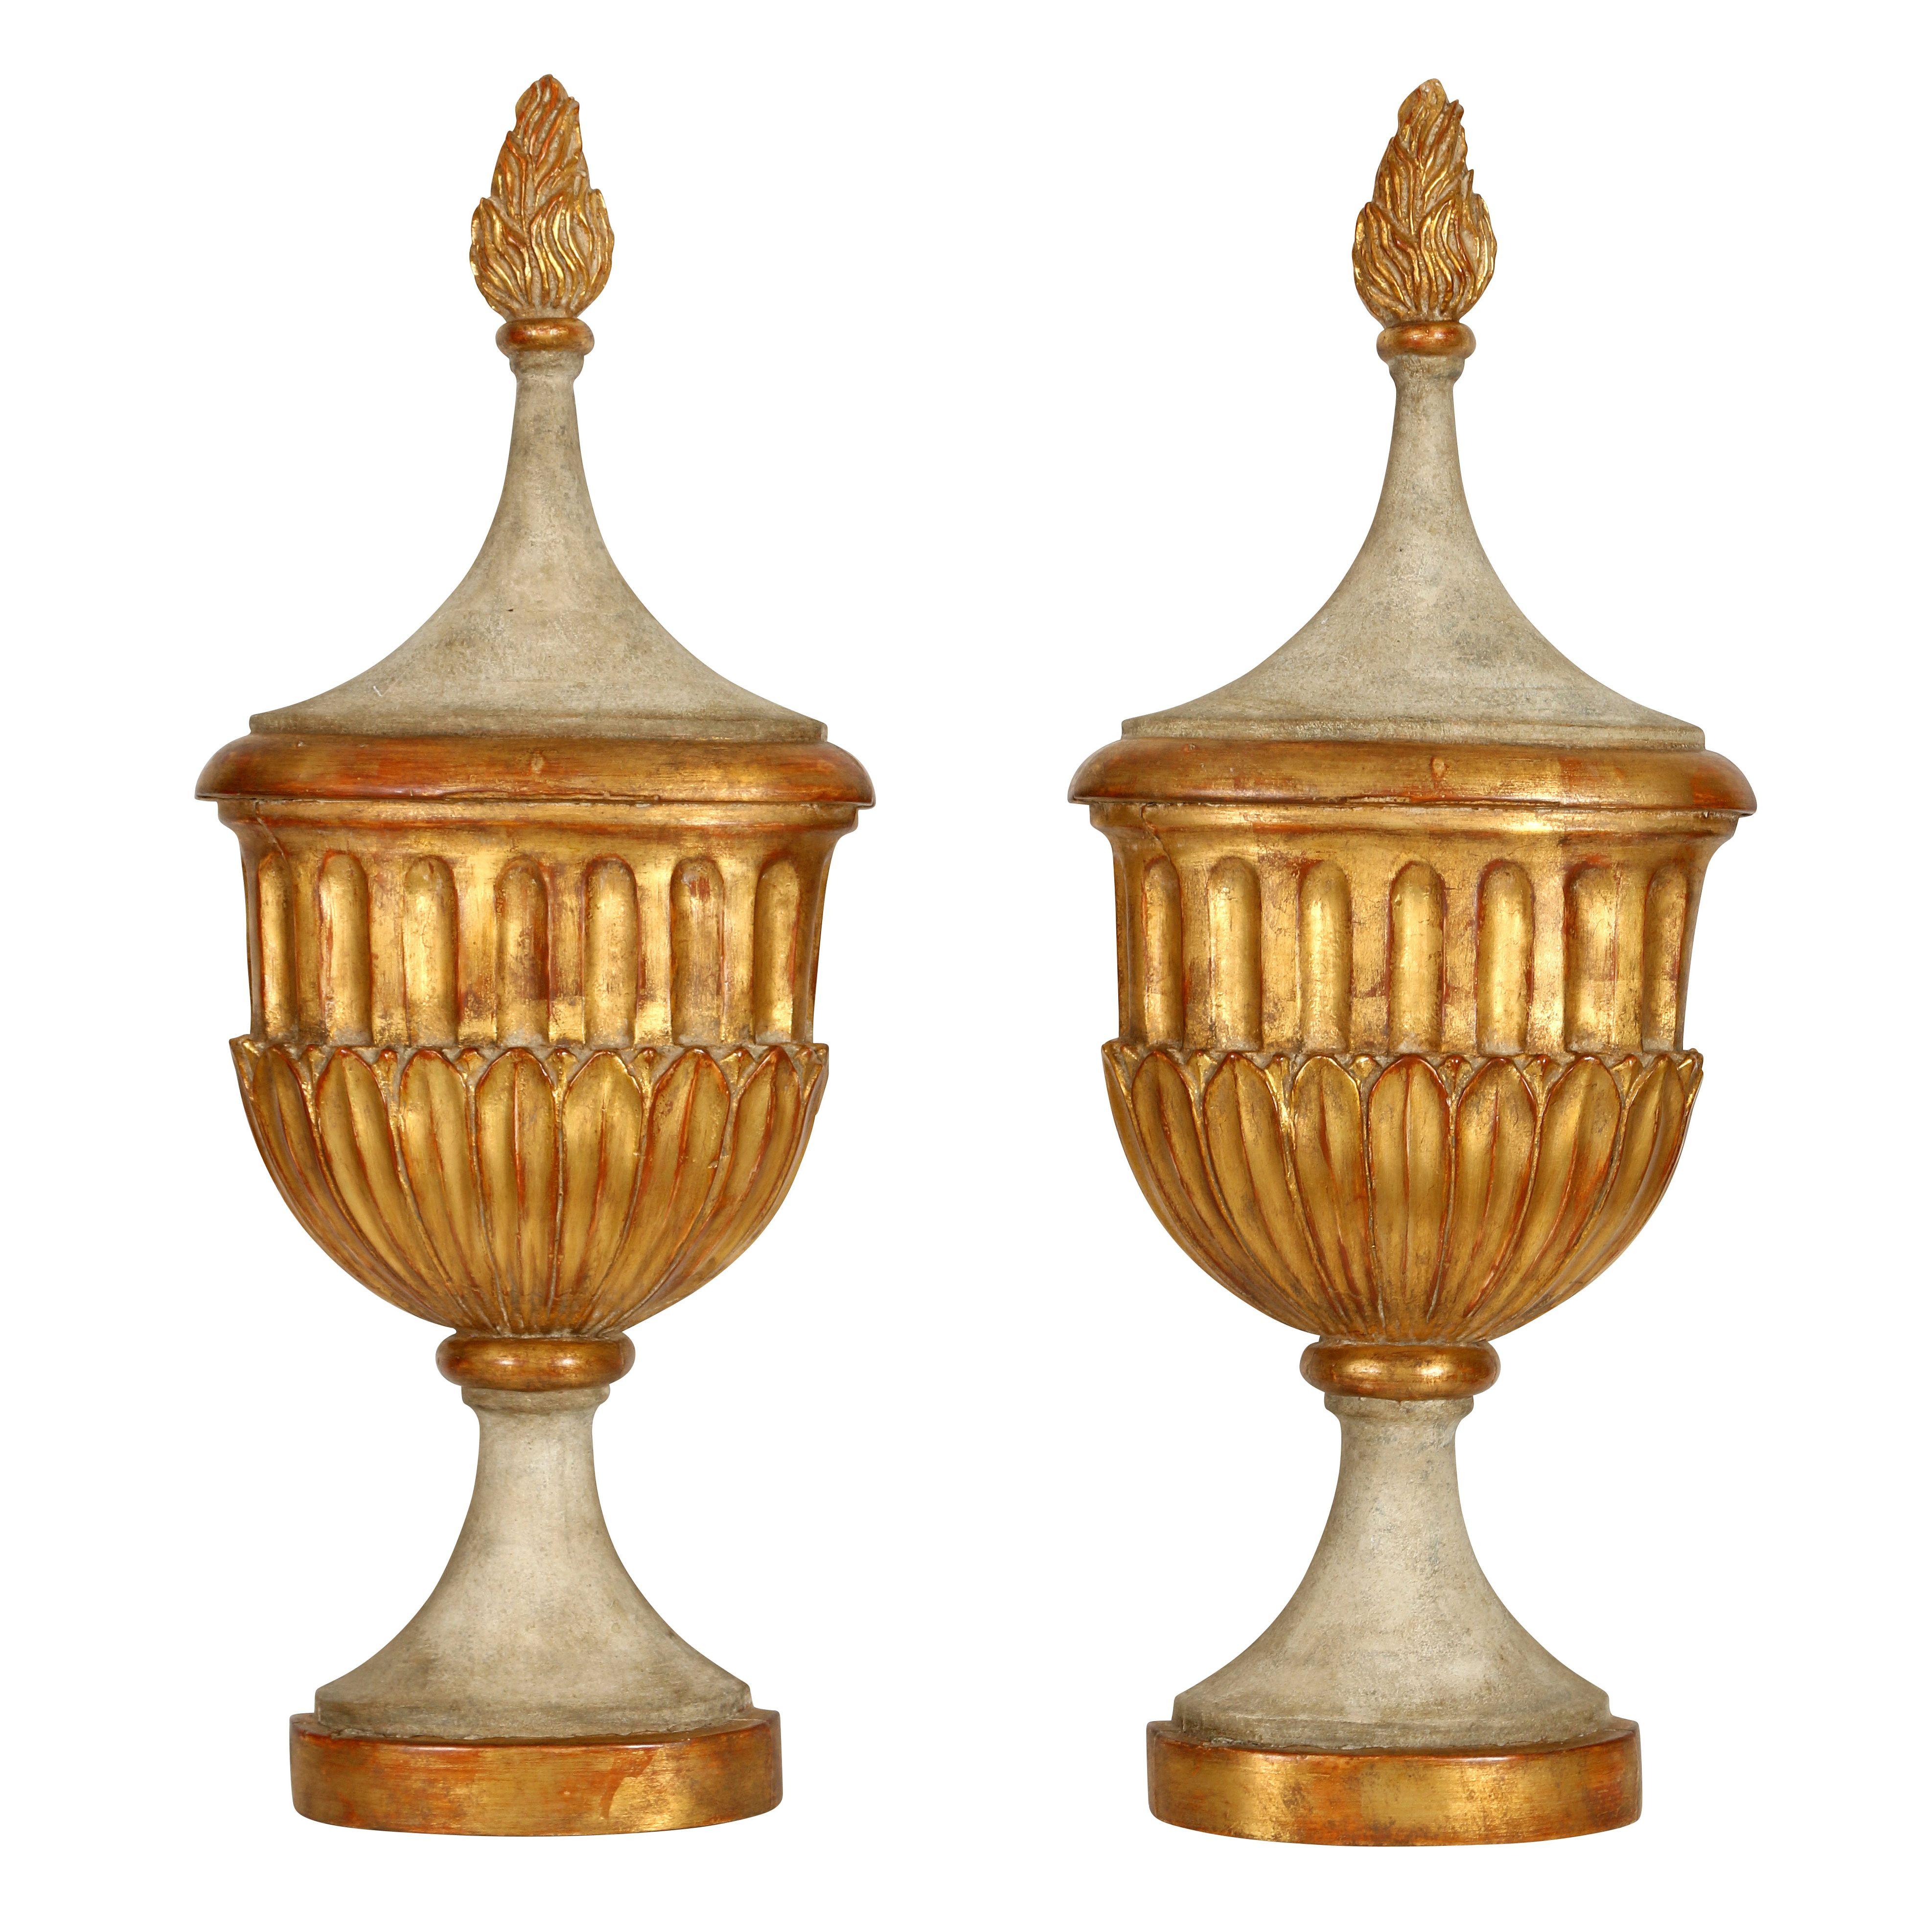 A pair of elegant painted plaster wall urns with gold leaf accents. Painted in a soft grayish white, the urns feature lovely carved detail, including a small flame at the top. This pair would look great flanking a mirror or at an entrance--a perfect